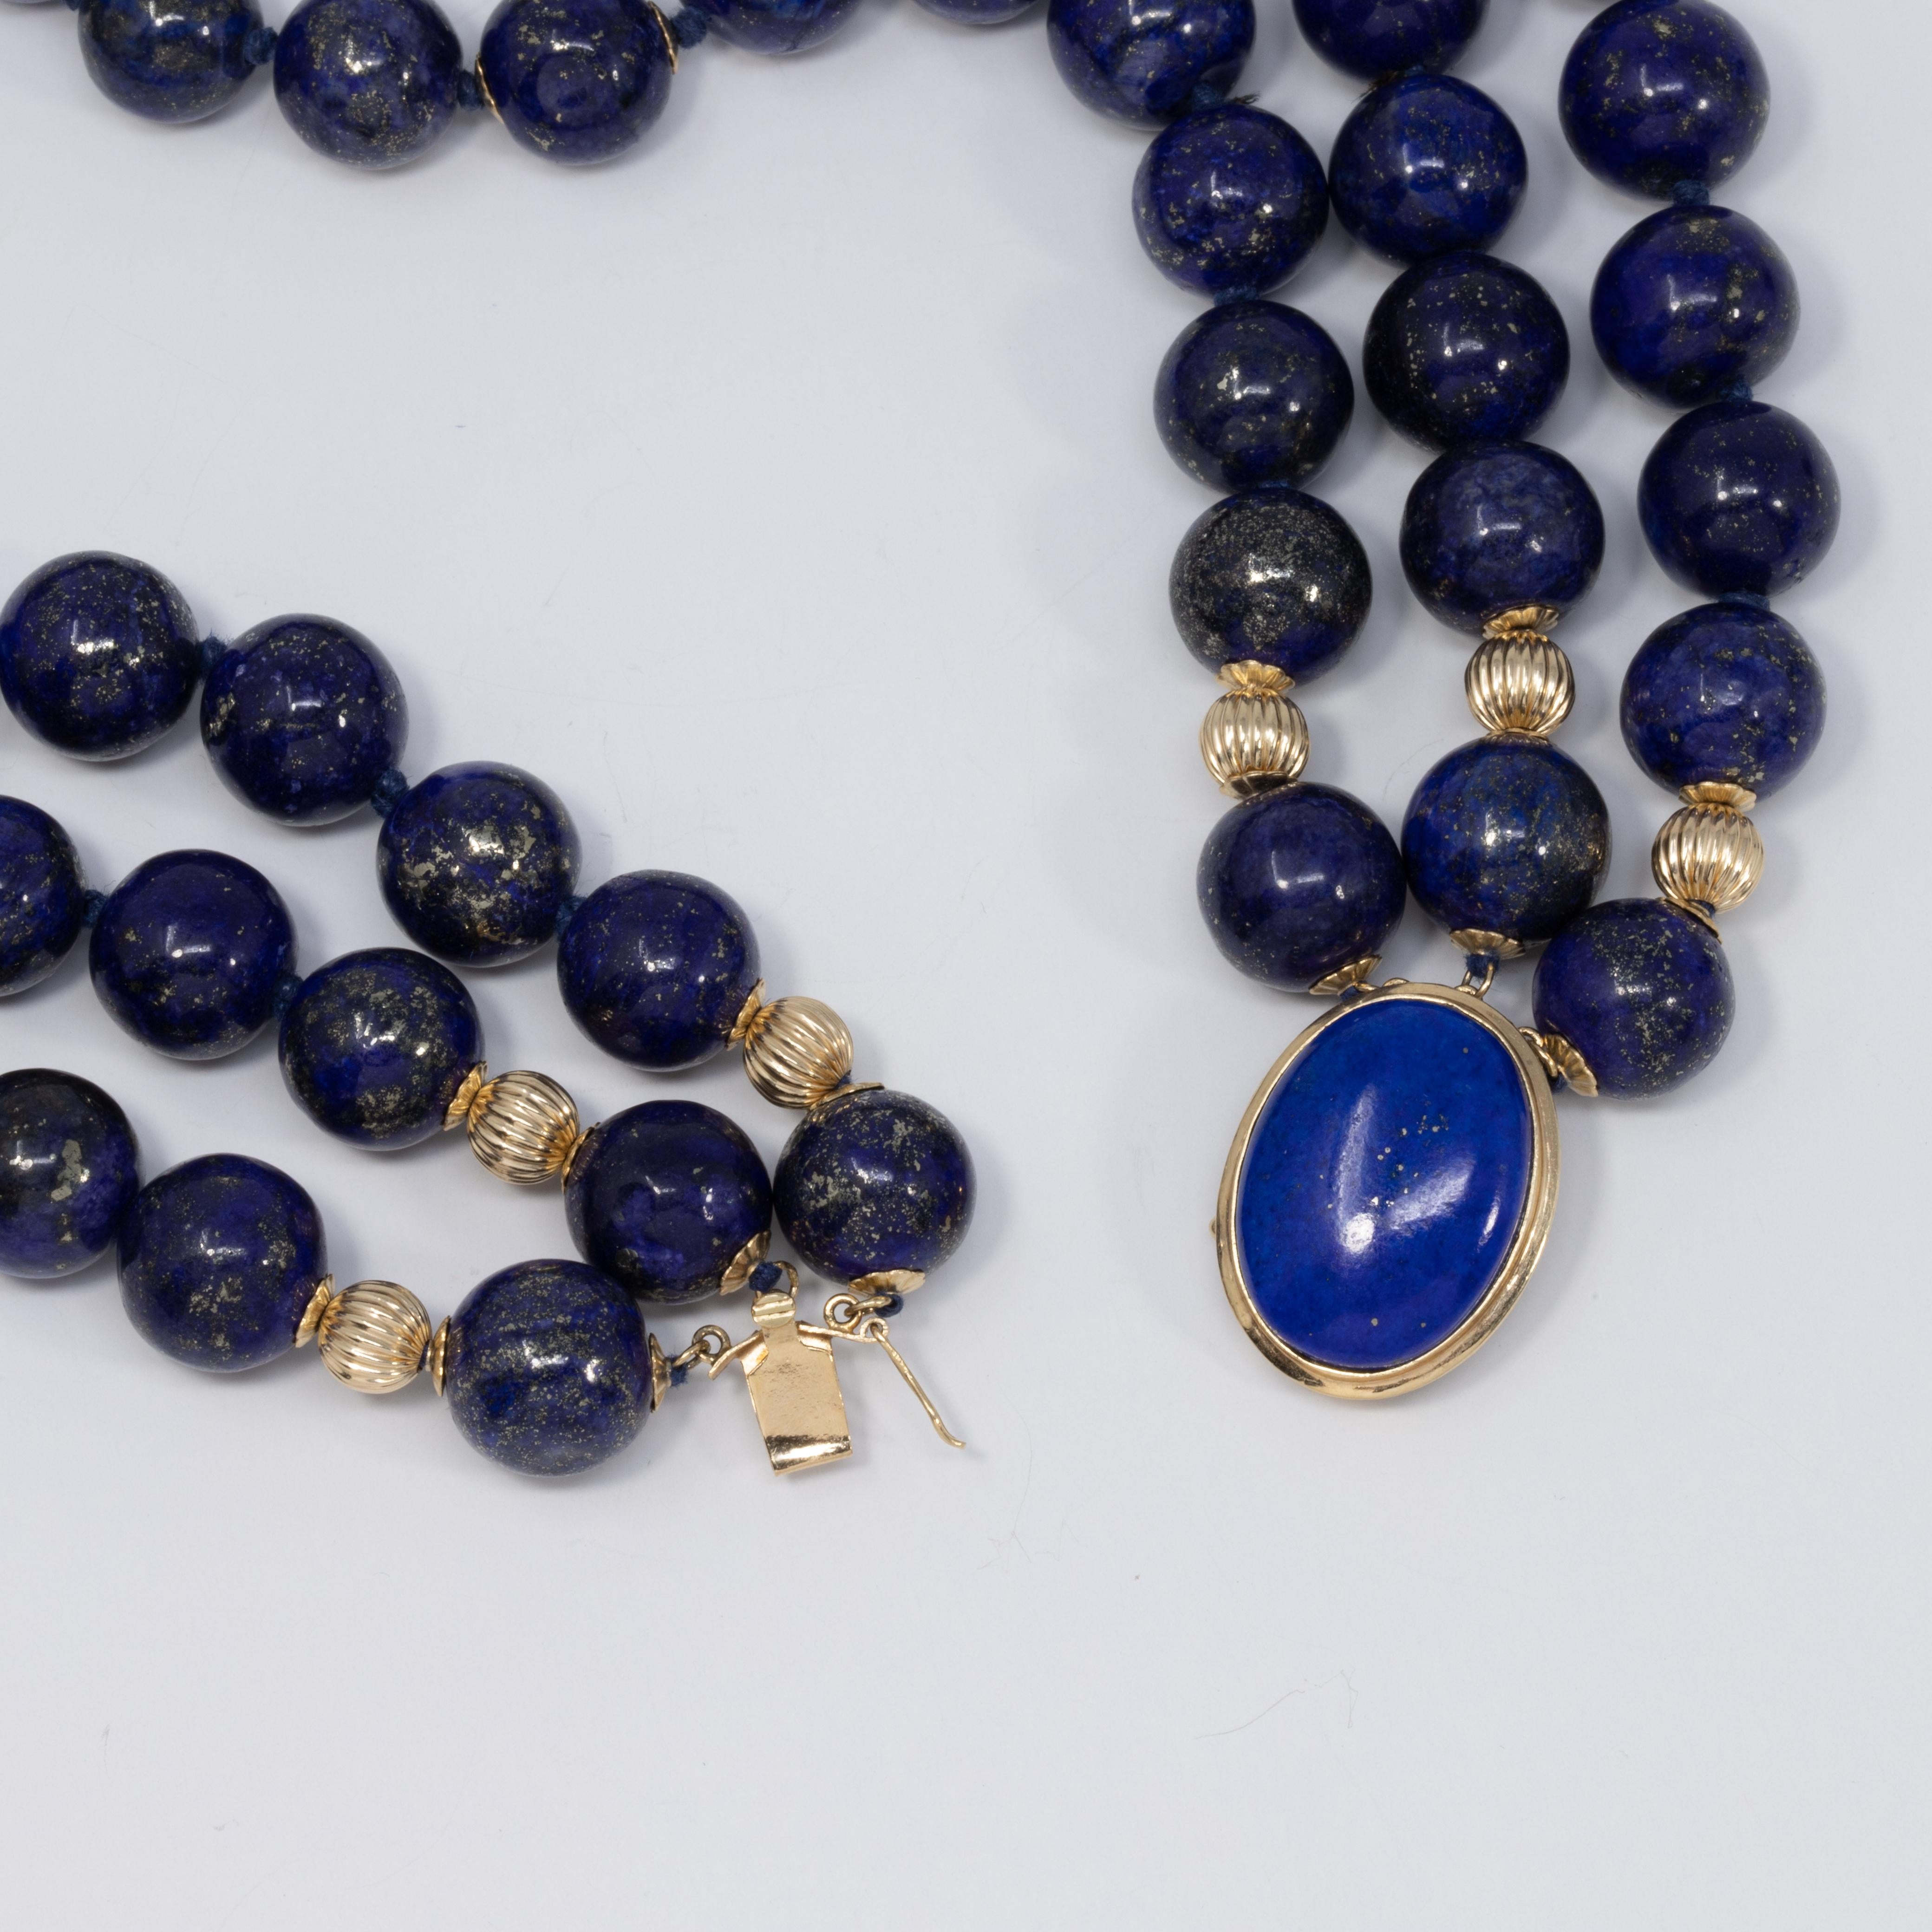 Lapiz Lazuli Triple Strand Knotted String Bead Necklace 14K Gold Clasp, Accents 3